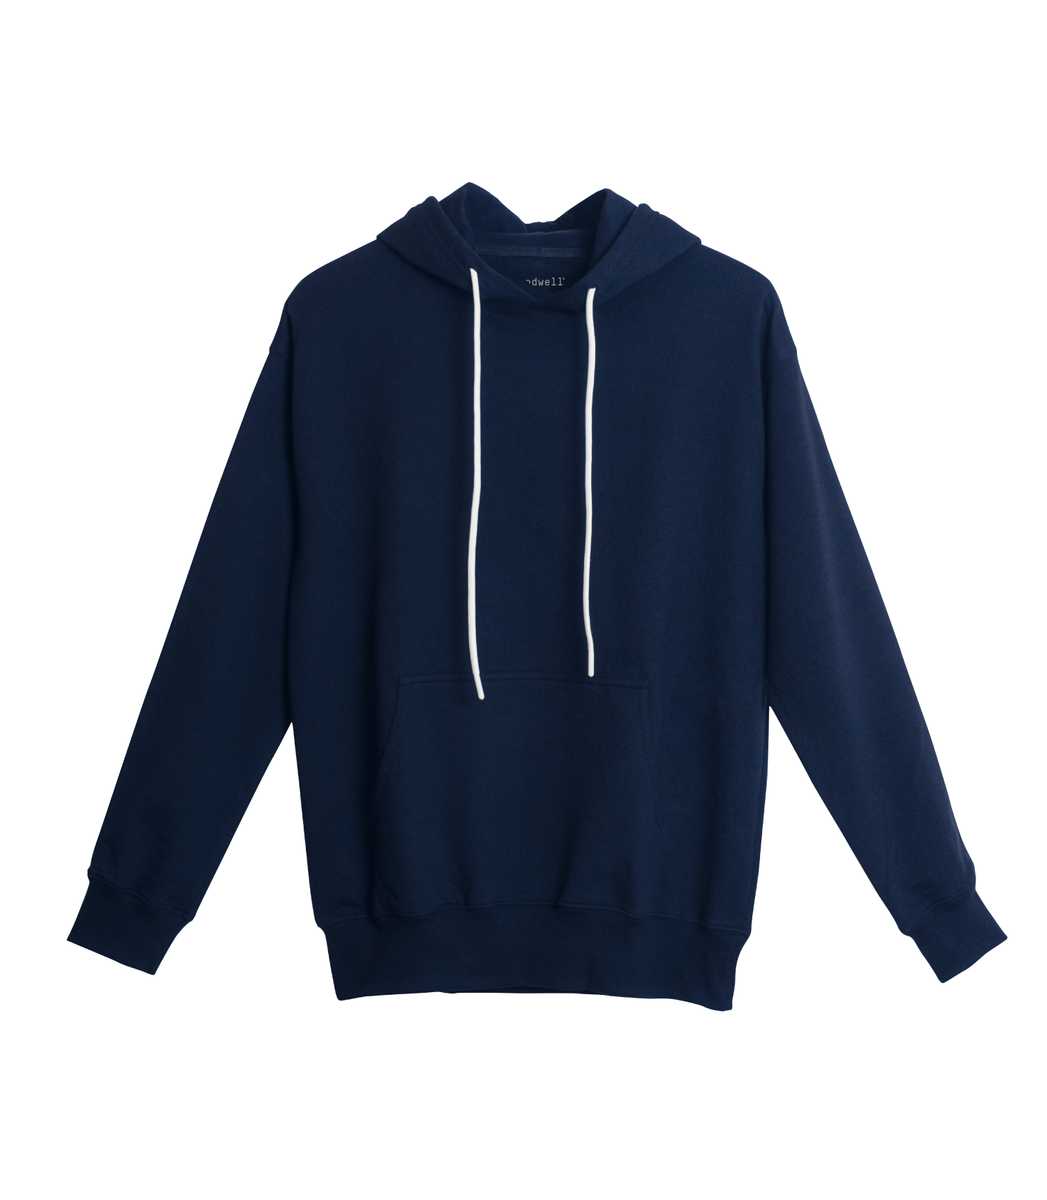 French Terry Sweatshirt V2 – woodwell®